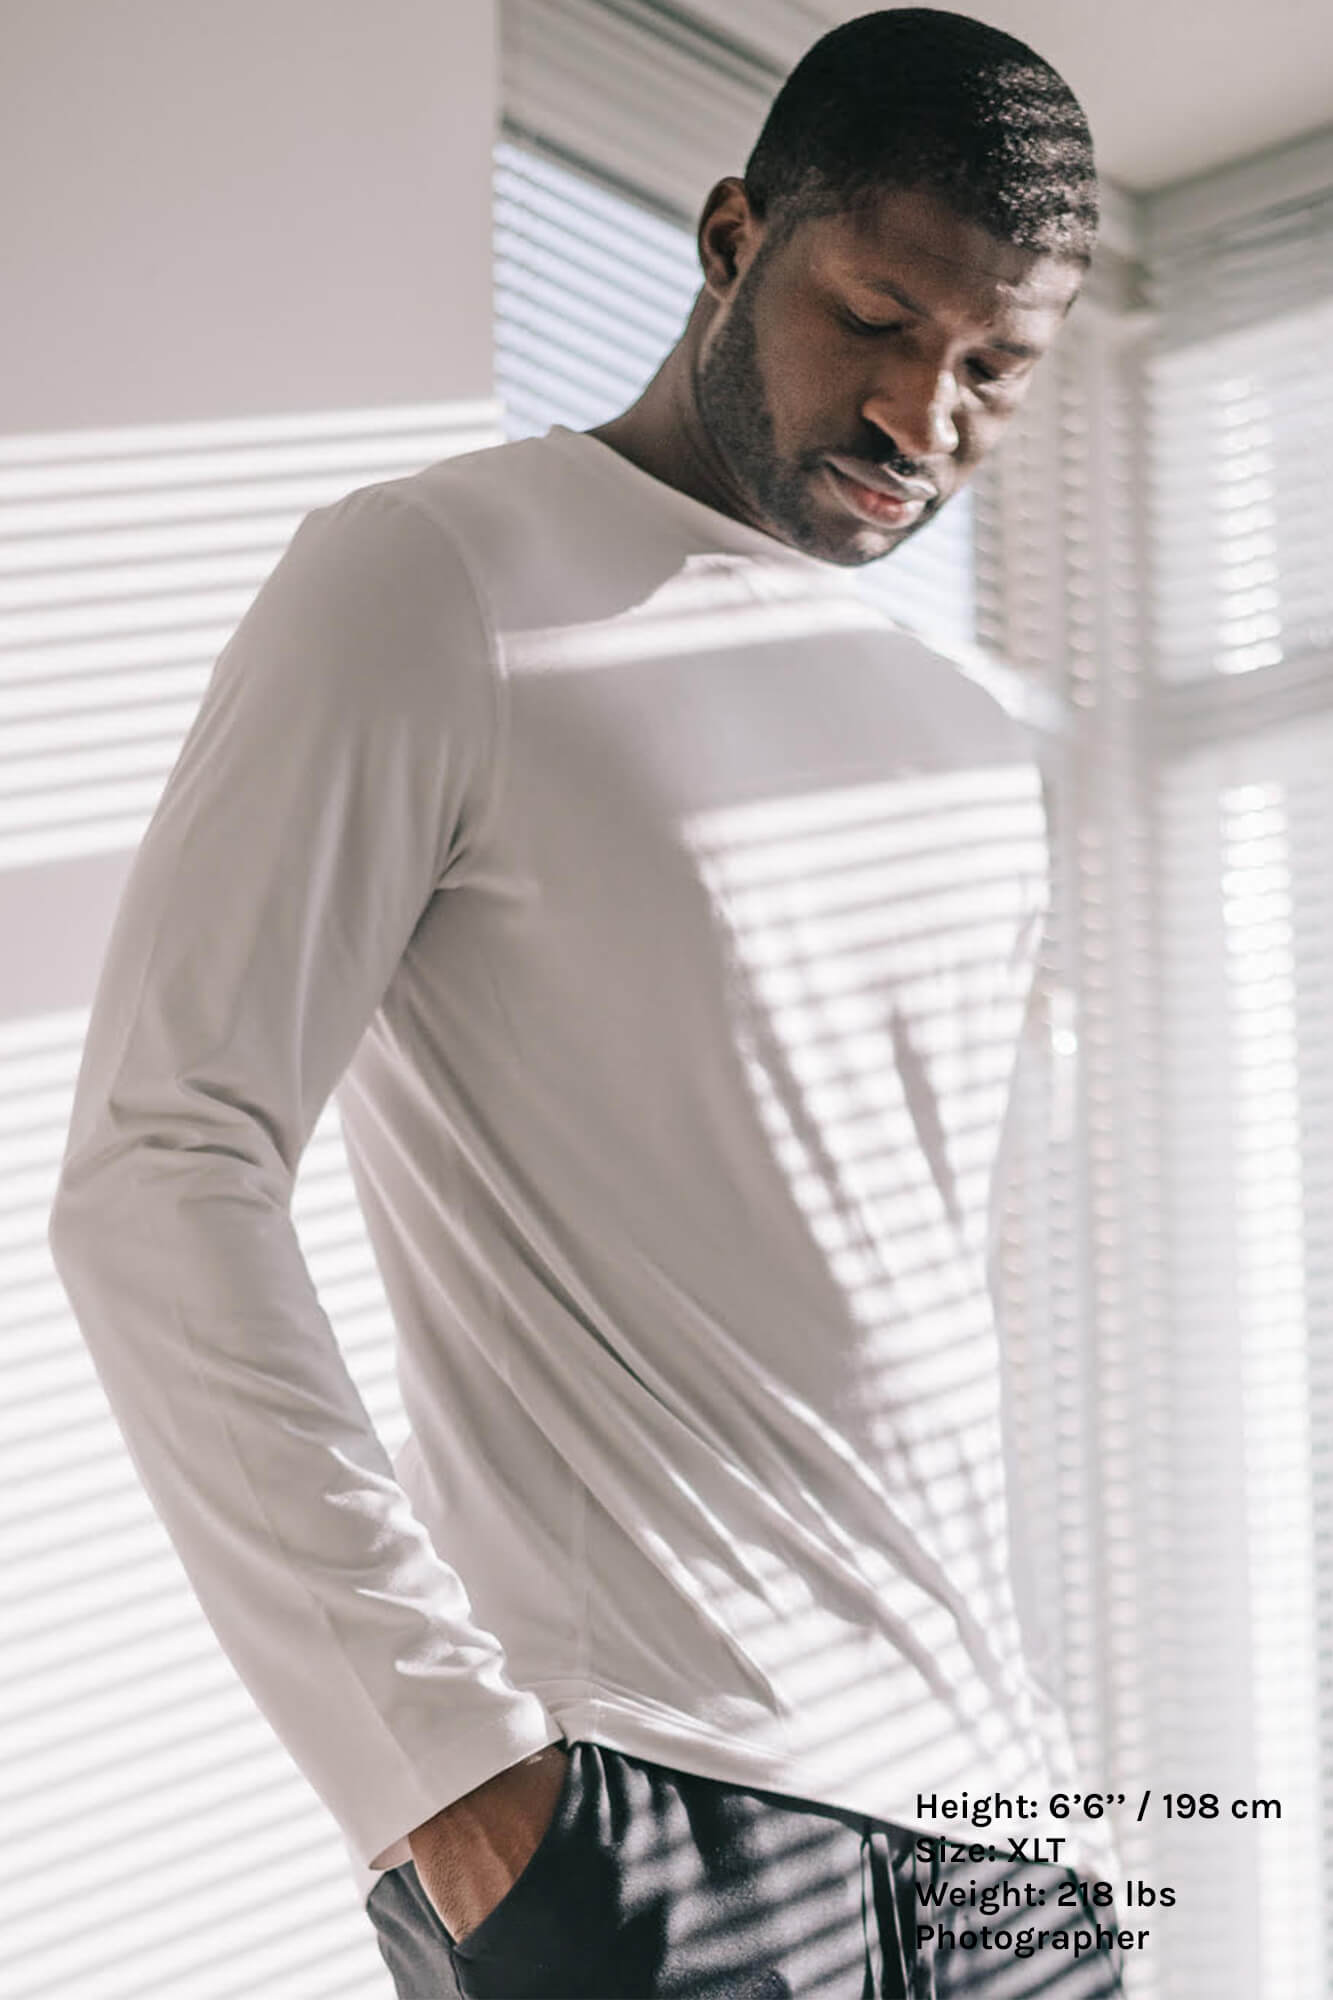 The Navas Lab Mac mens tall long sleeve t shirts for tall guys in white. The perfect tall slim shirt for tall and skinny guys looking for style and comfort.